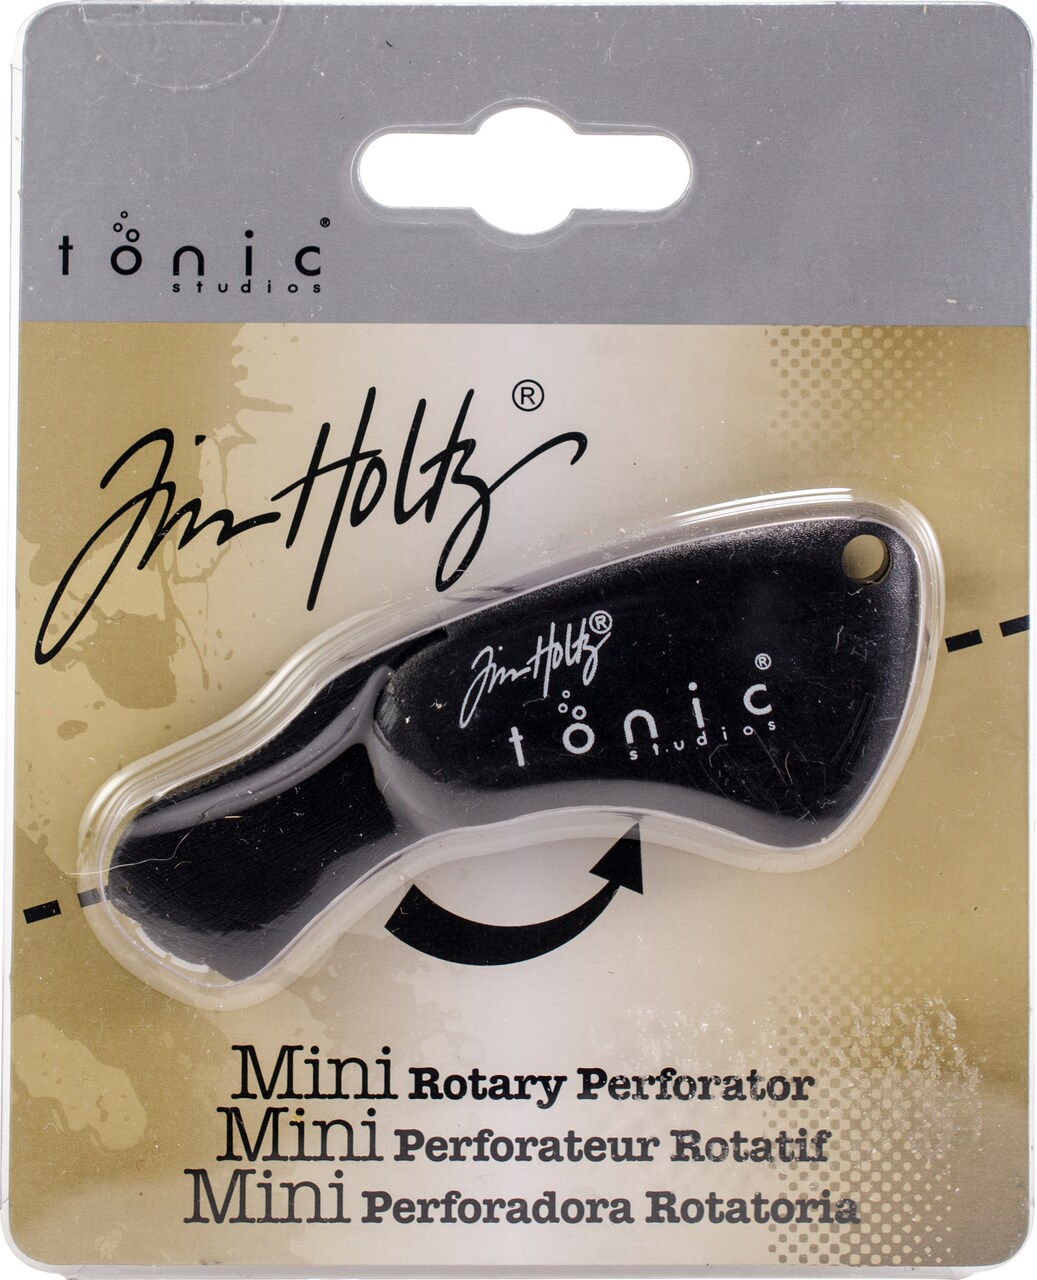 Tim Holtz Mini Rotary Perforator - 18mm Pinking Blade for Cutting